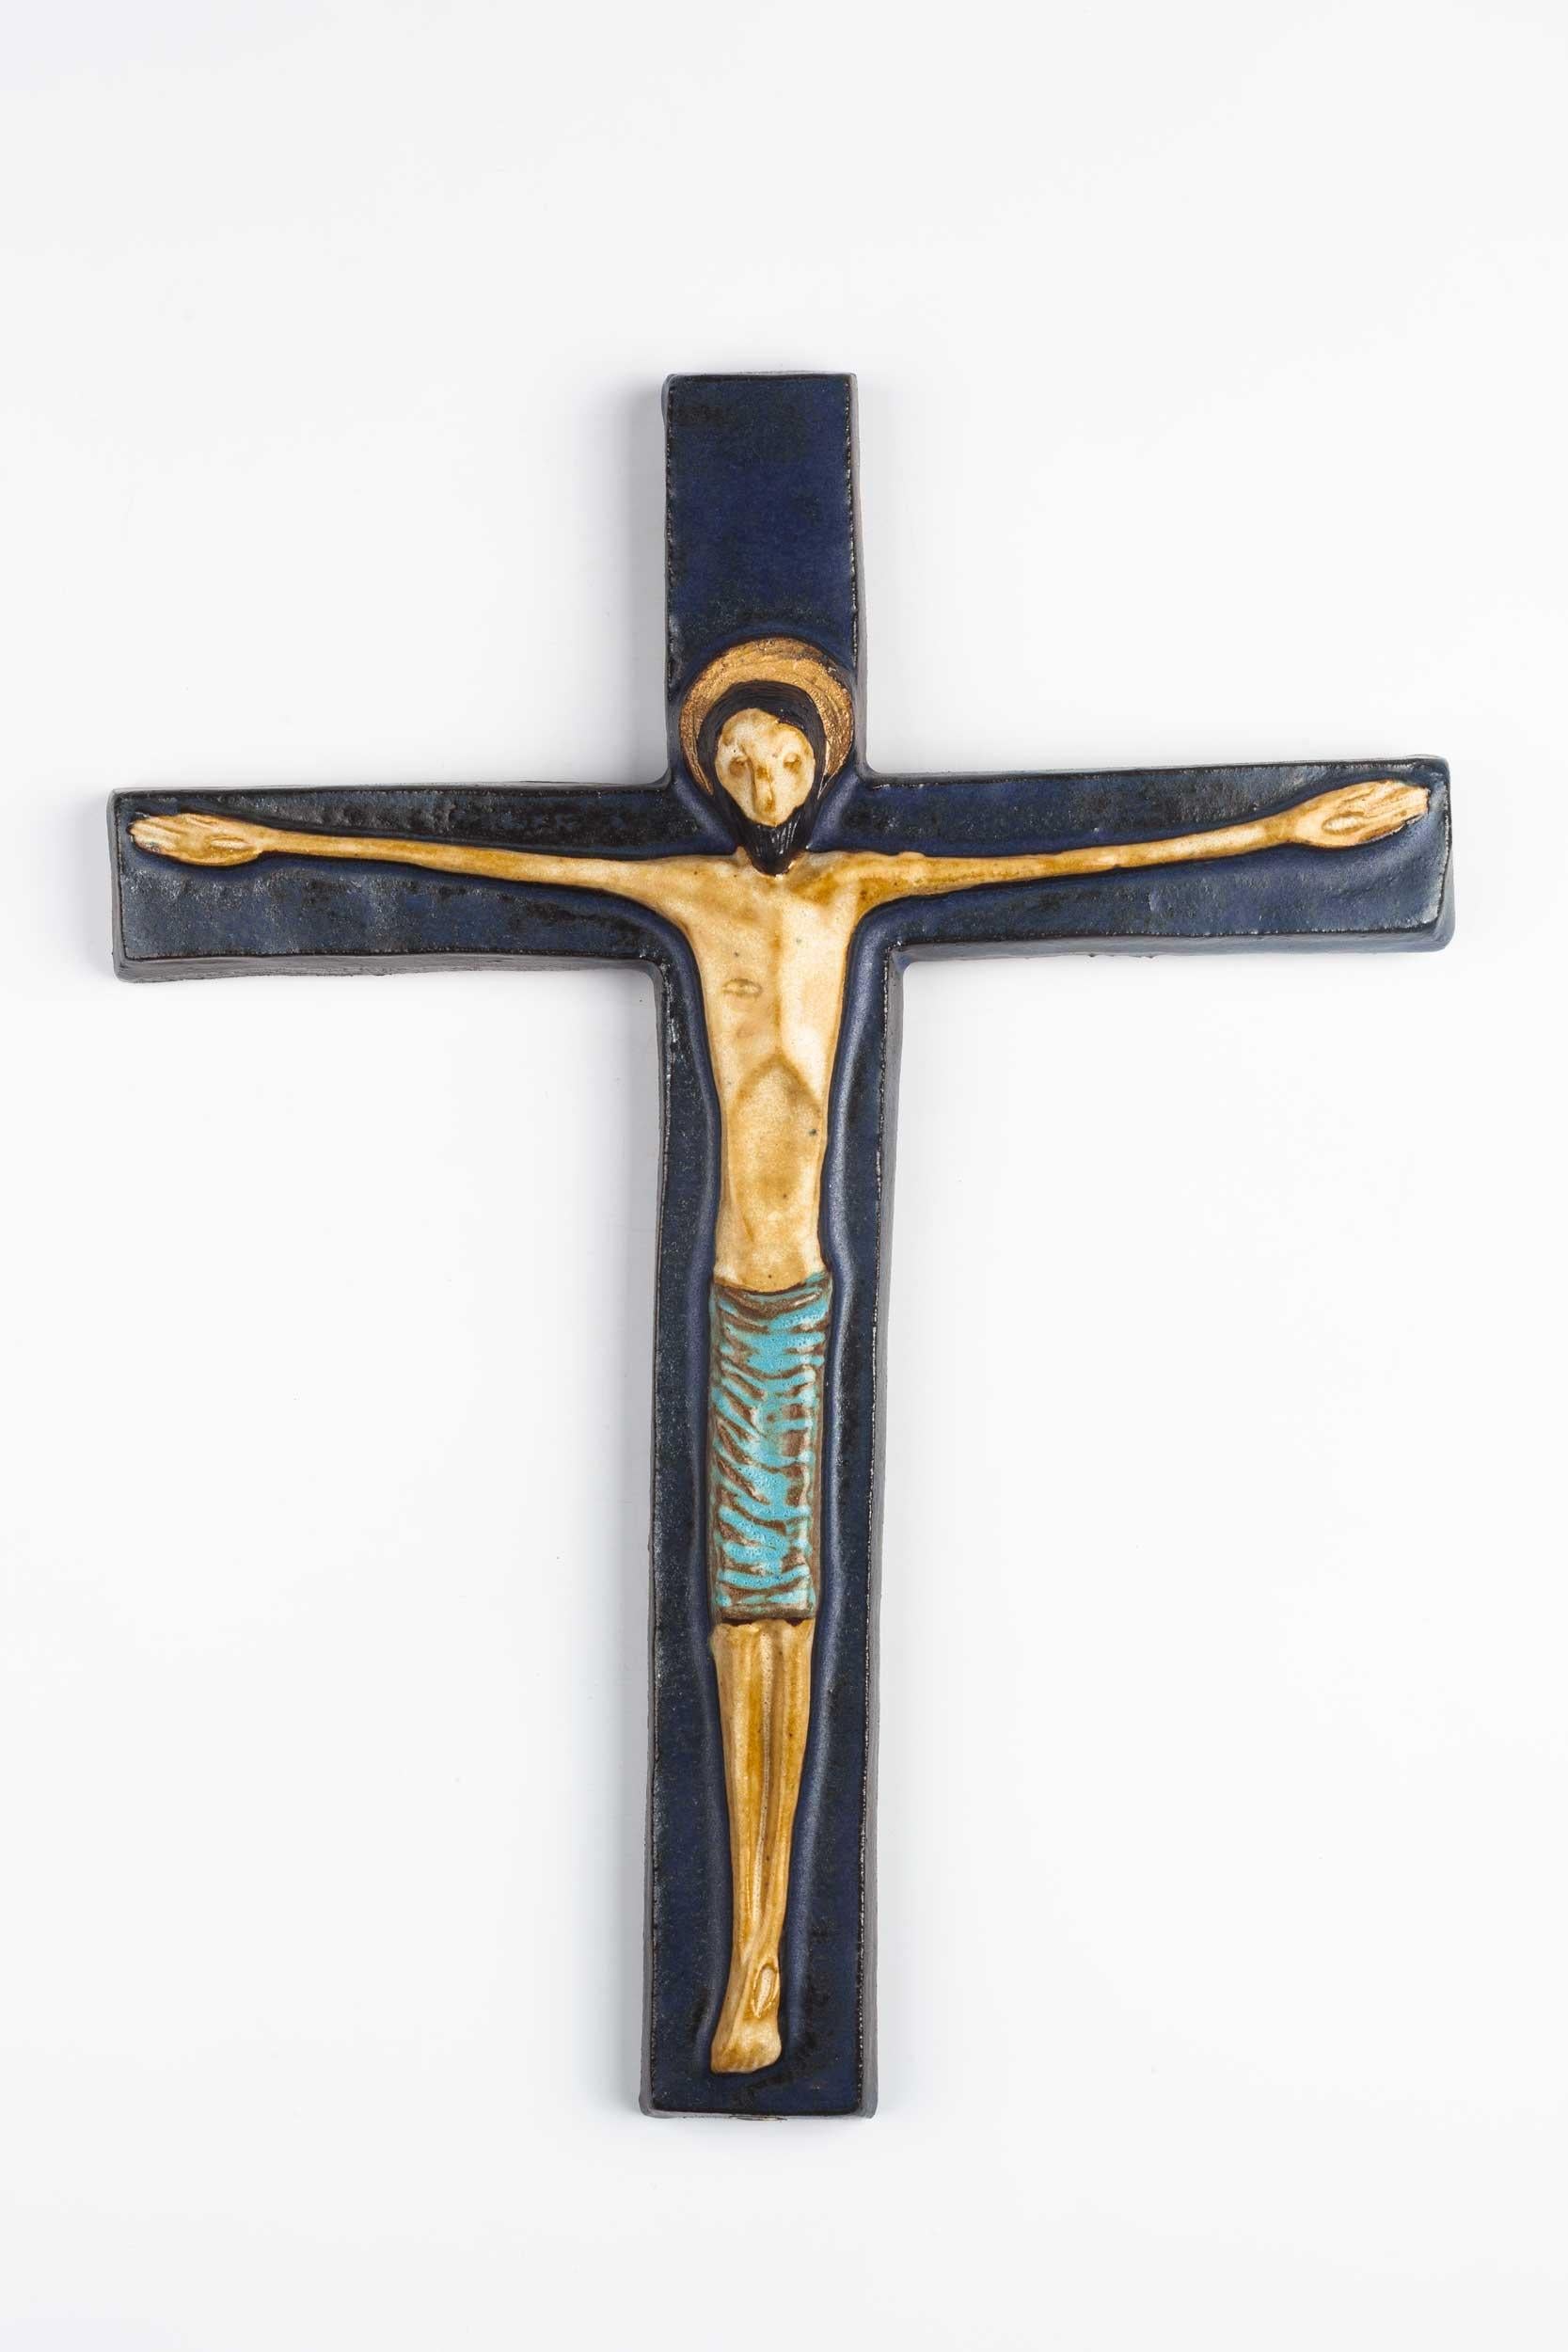 Midcentury European wall cross in dark and light blue with endearing christ figure in volume. From a large collection of vintage crosses handmade by Flemish artisans. 

From modernism to brutalism, the crosses in our collection range from being as